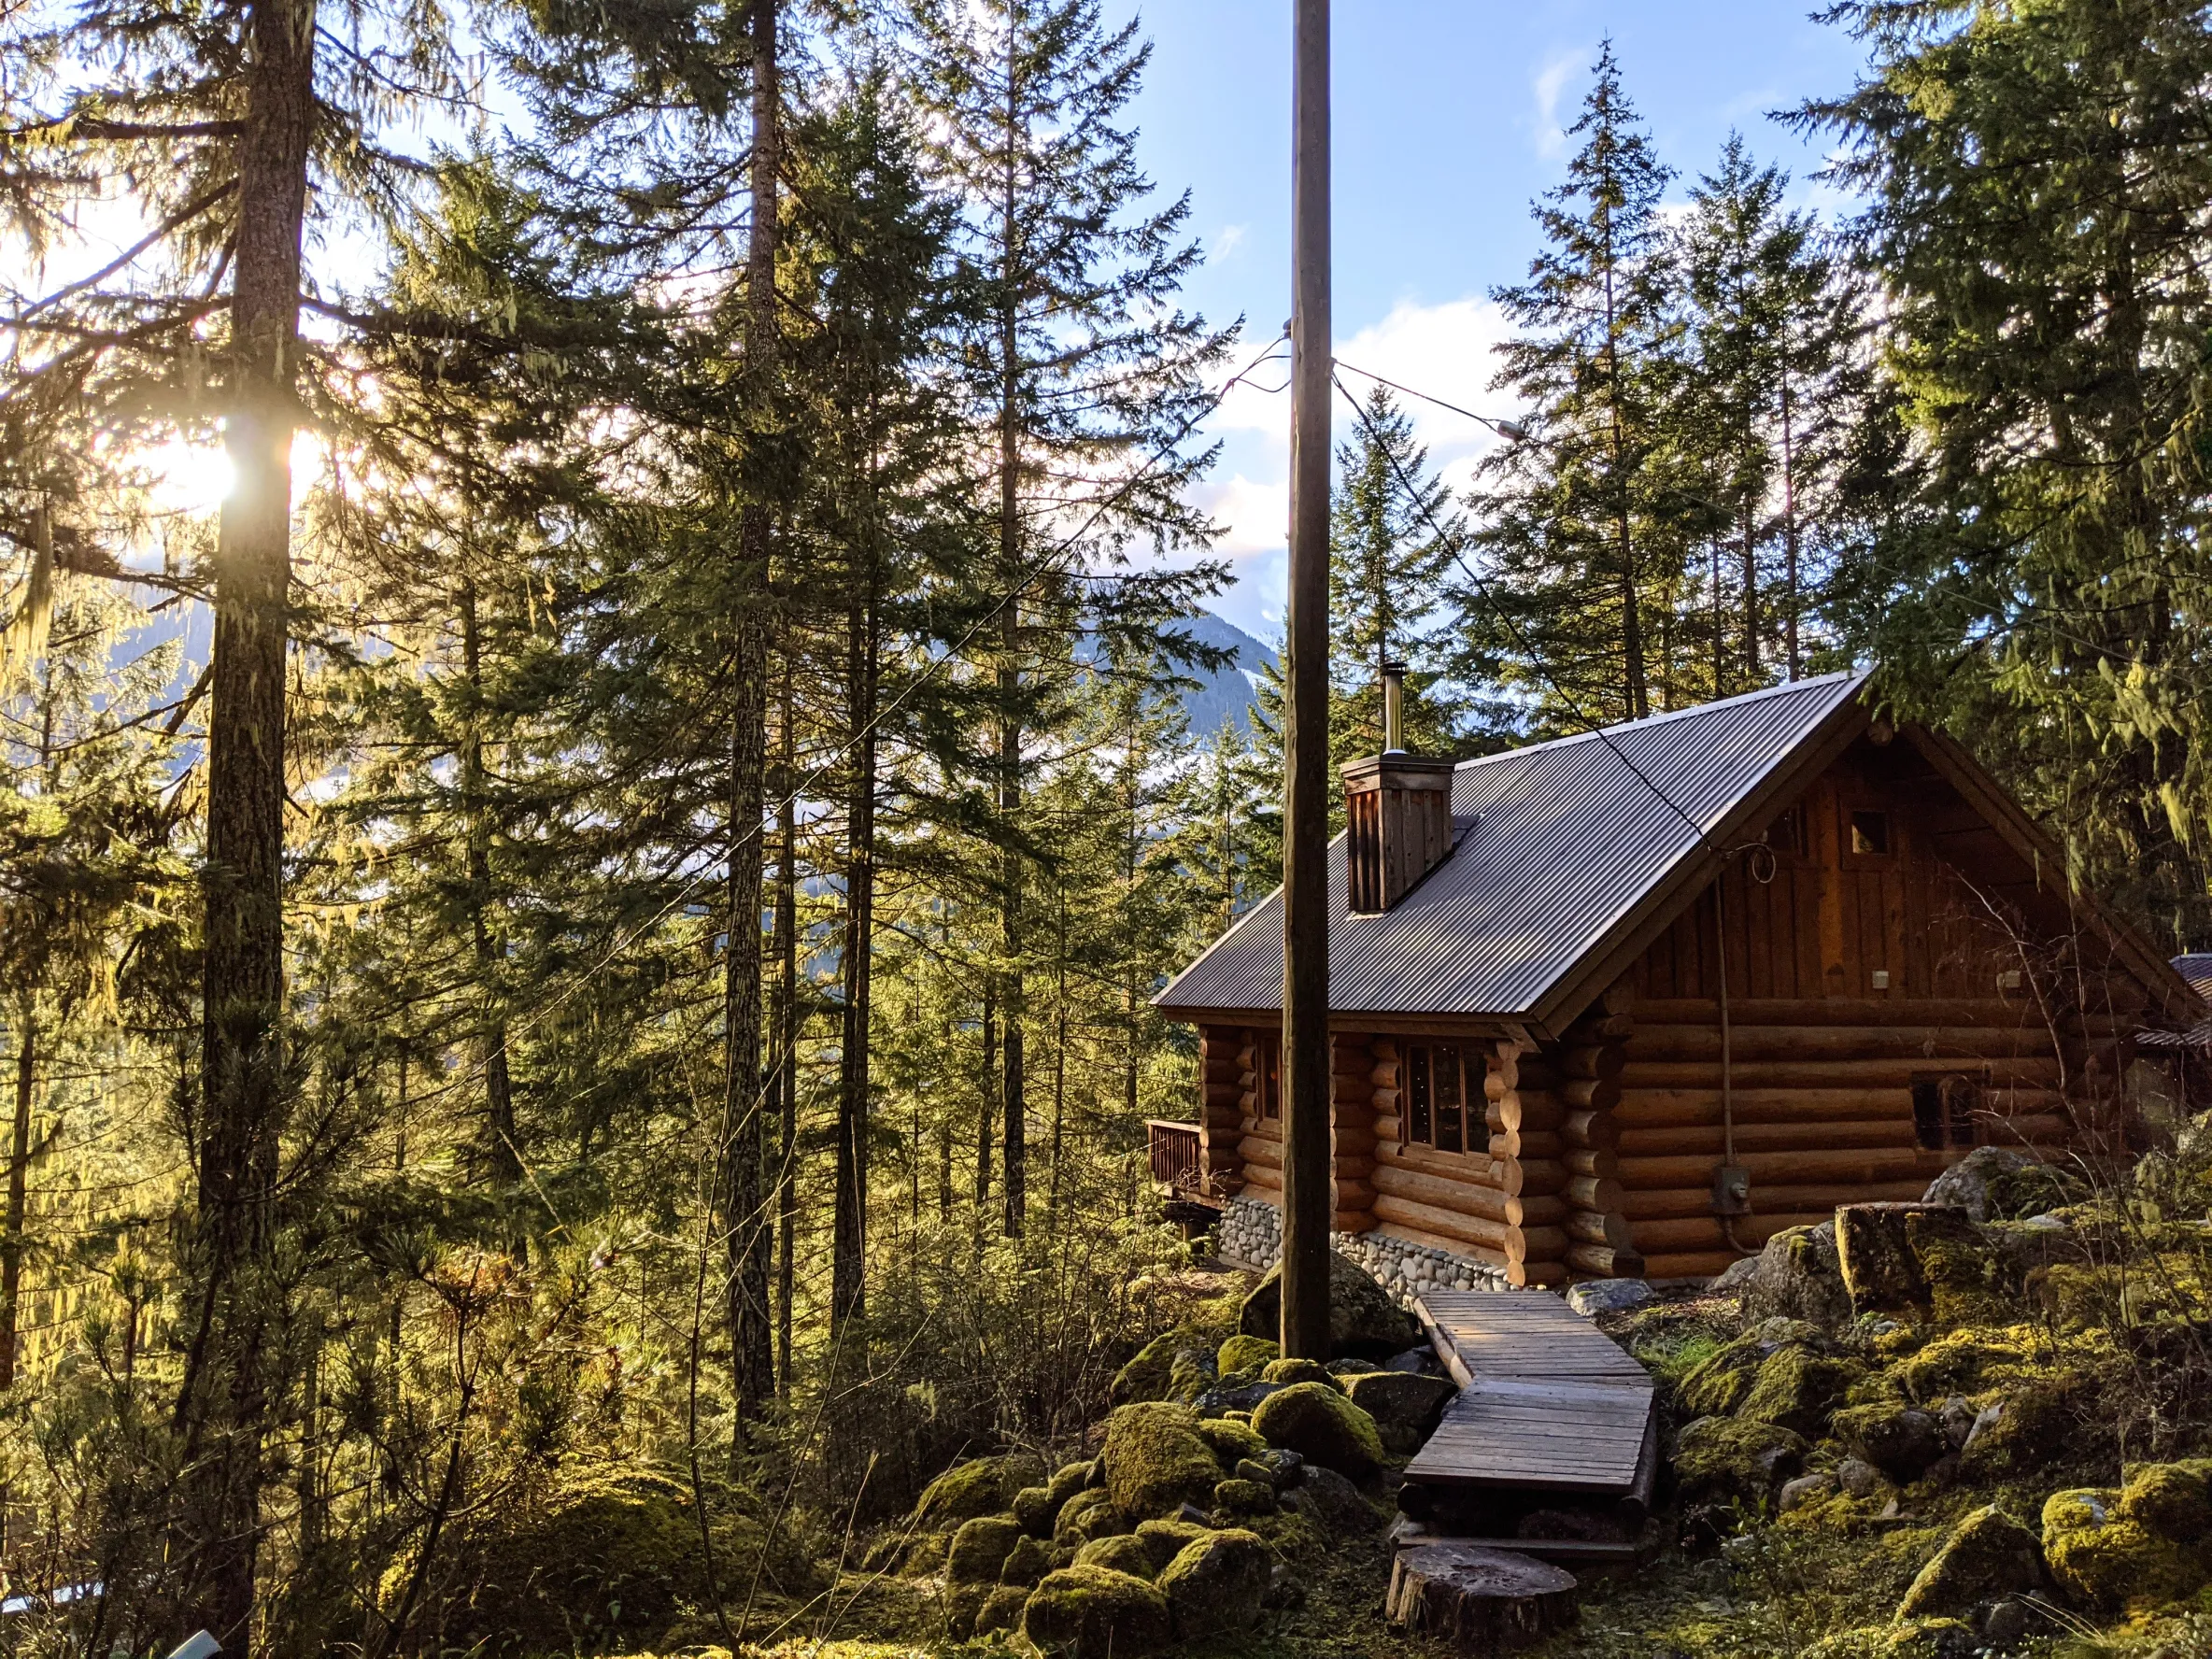 A log cabin in a forest in BC